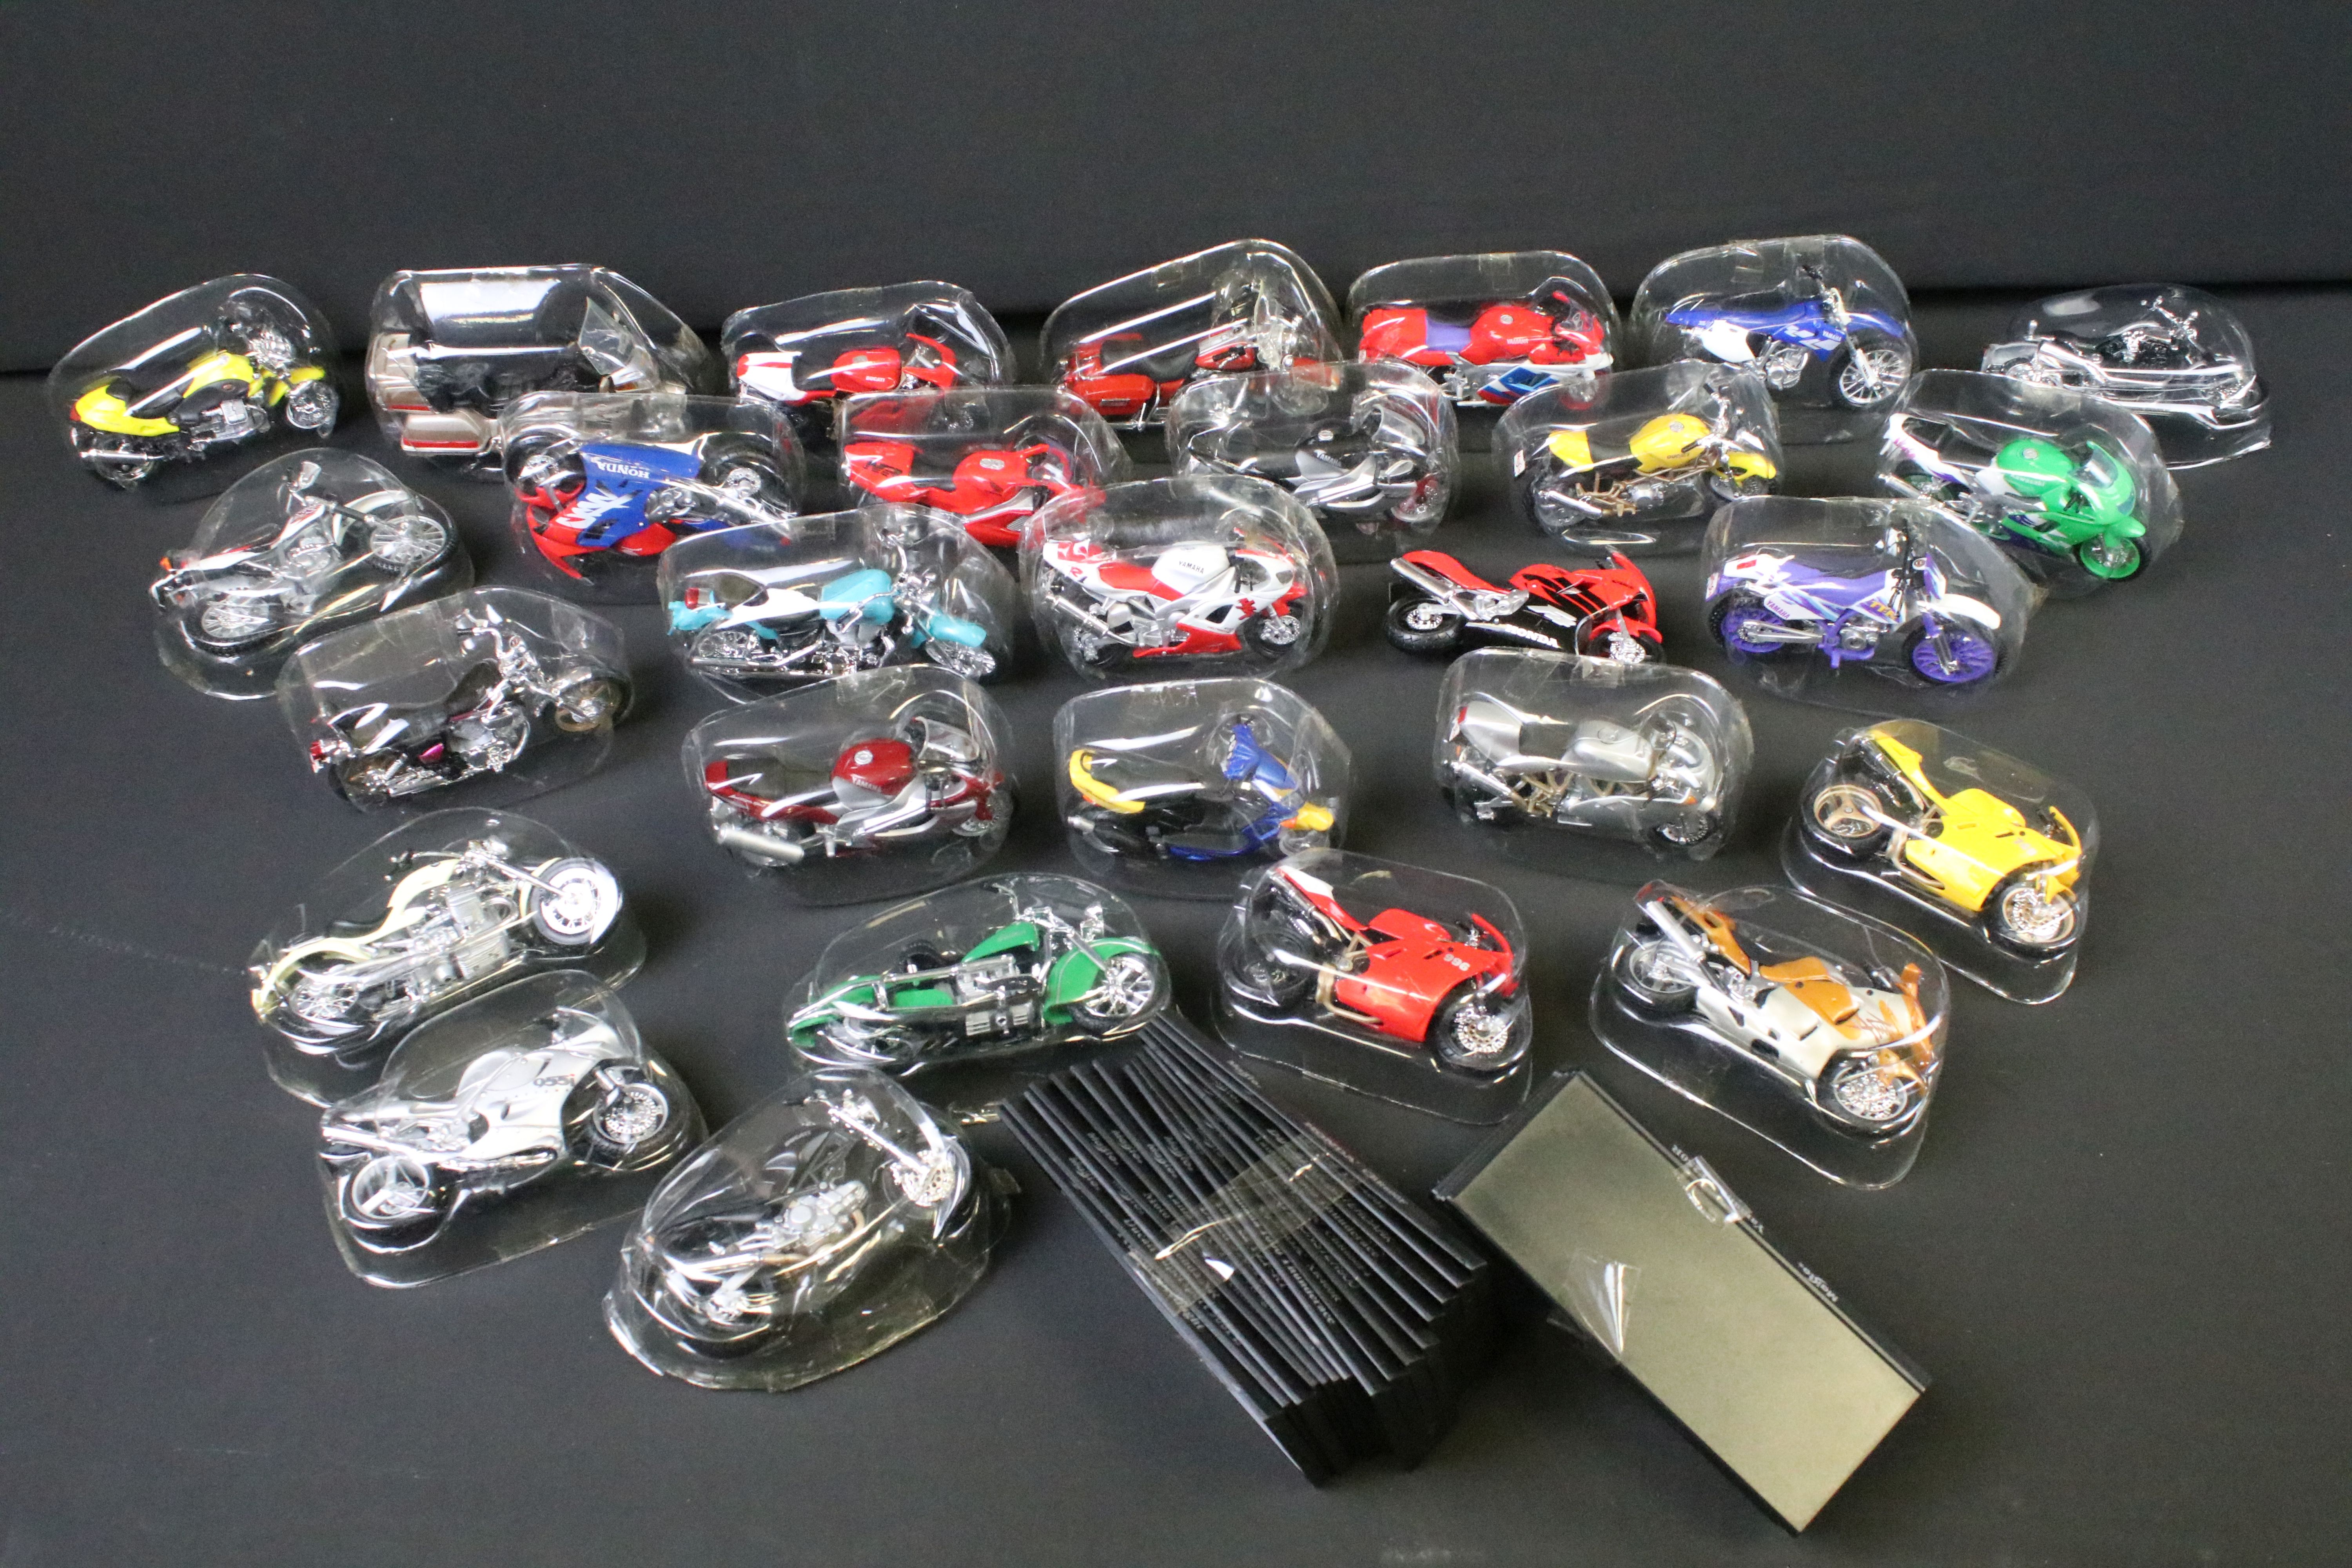 28 Maisto diecast motorbike models, all with plastic packaging and bases, ex